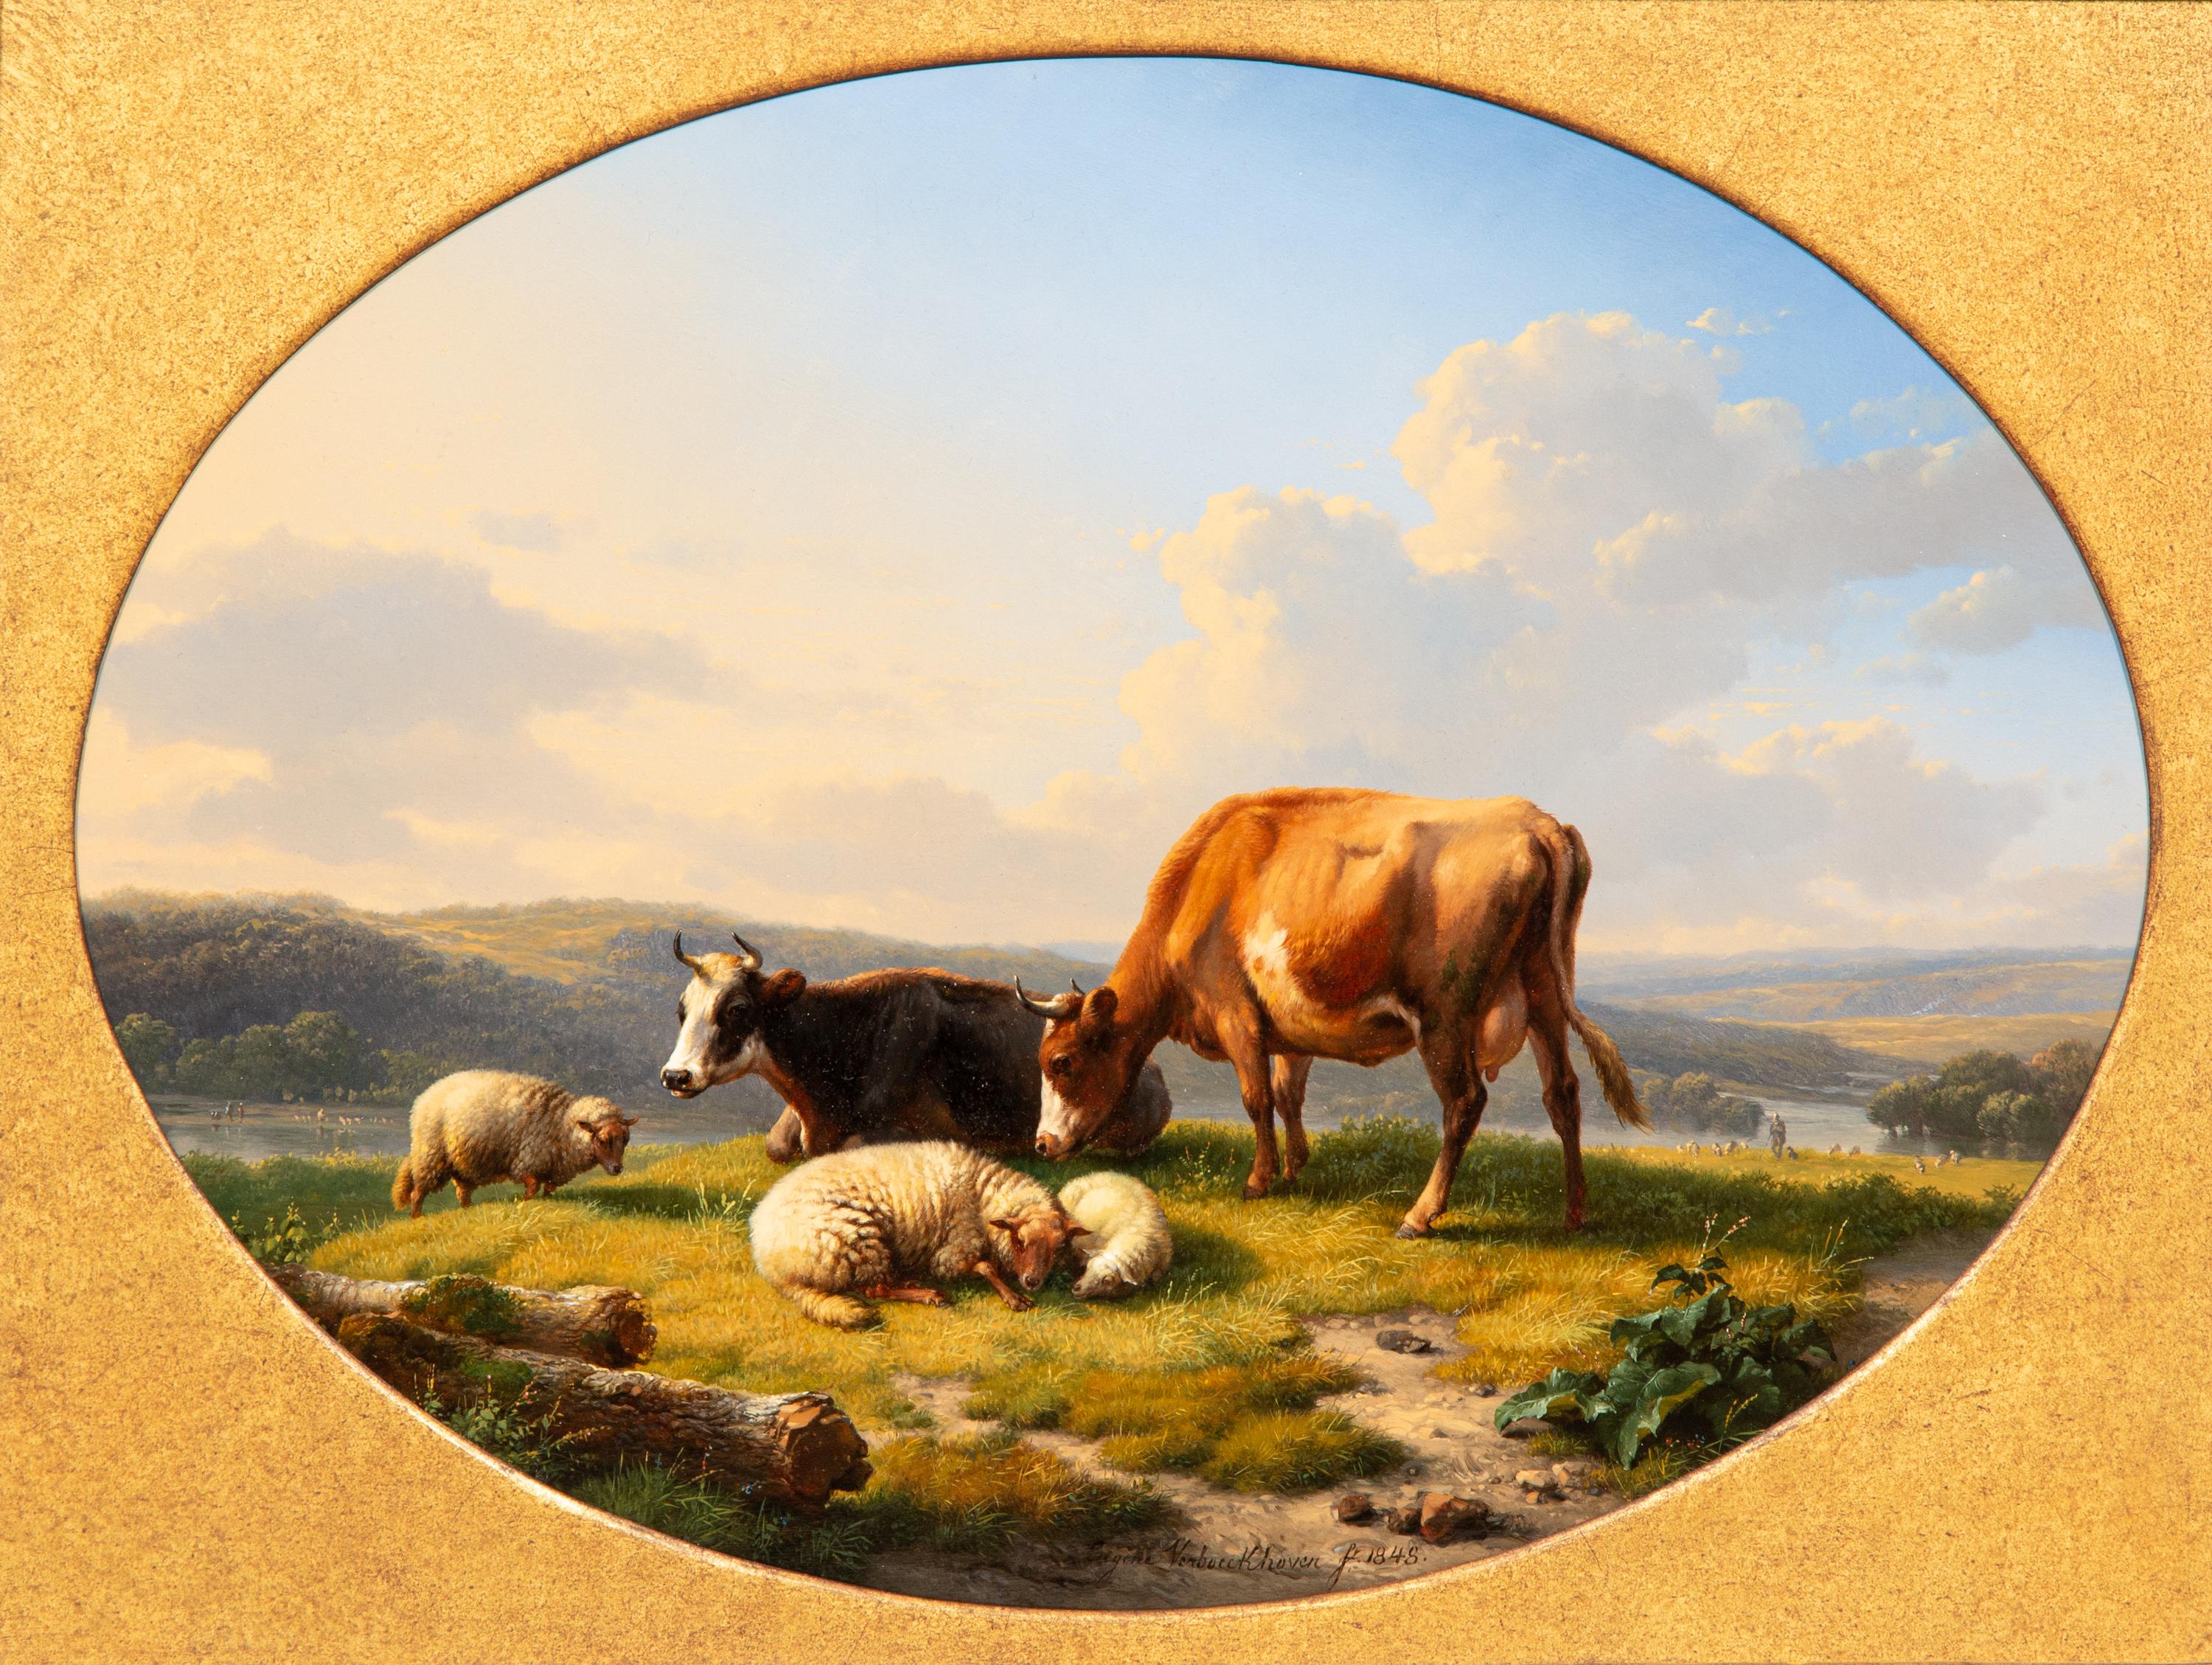 ‘Landscape with Cows and Sheep in a wide river landscape’, Eugène Verboeckhoven - Painting by Eugène Joseph Verboeckhoven